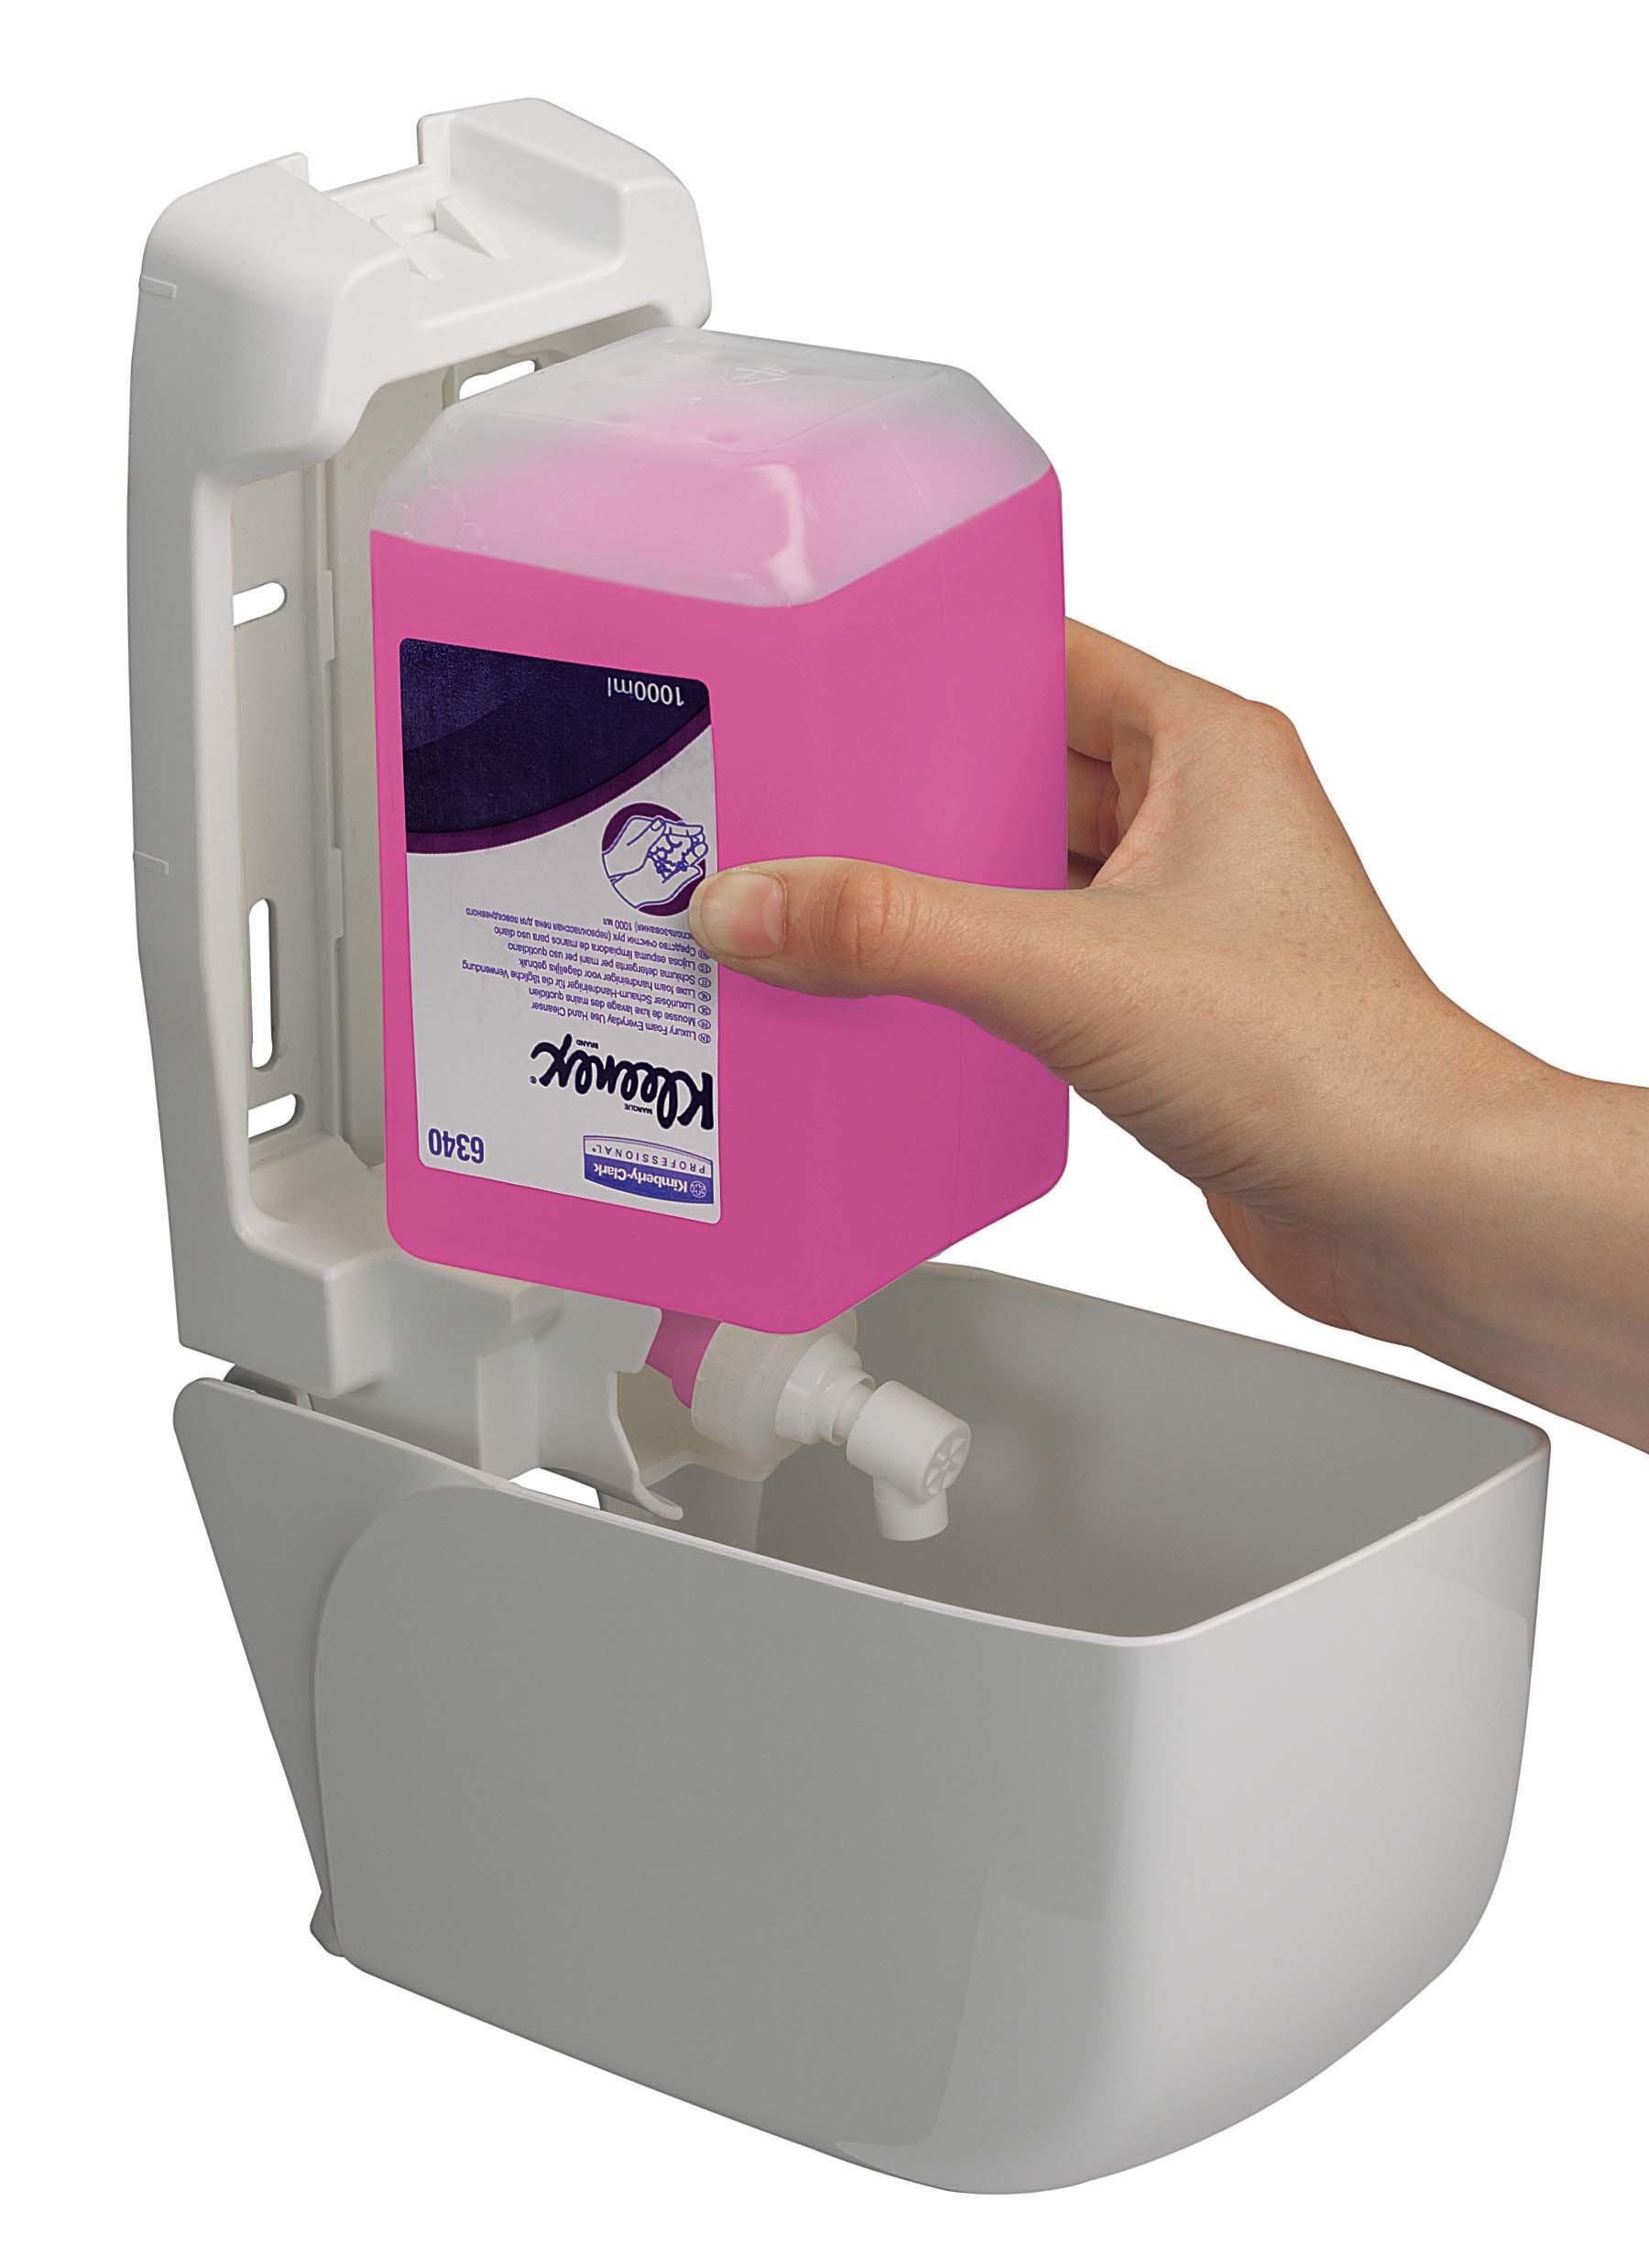 Kleenex® Everyday Use Hand Cleanser 6331 - Pink Hand Wash - 6 x 1 Litre  Hand Wash Refills (6 Litre total)